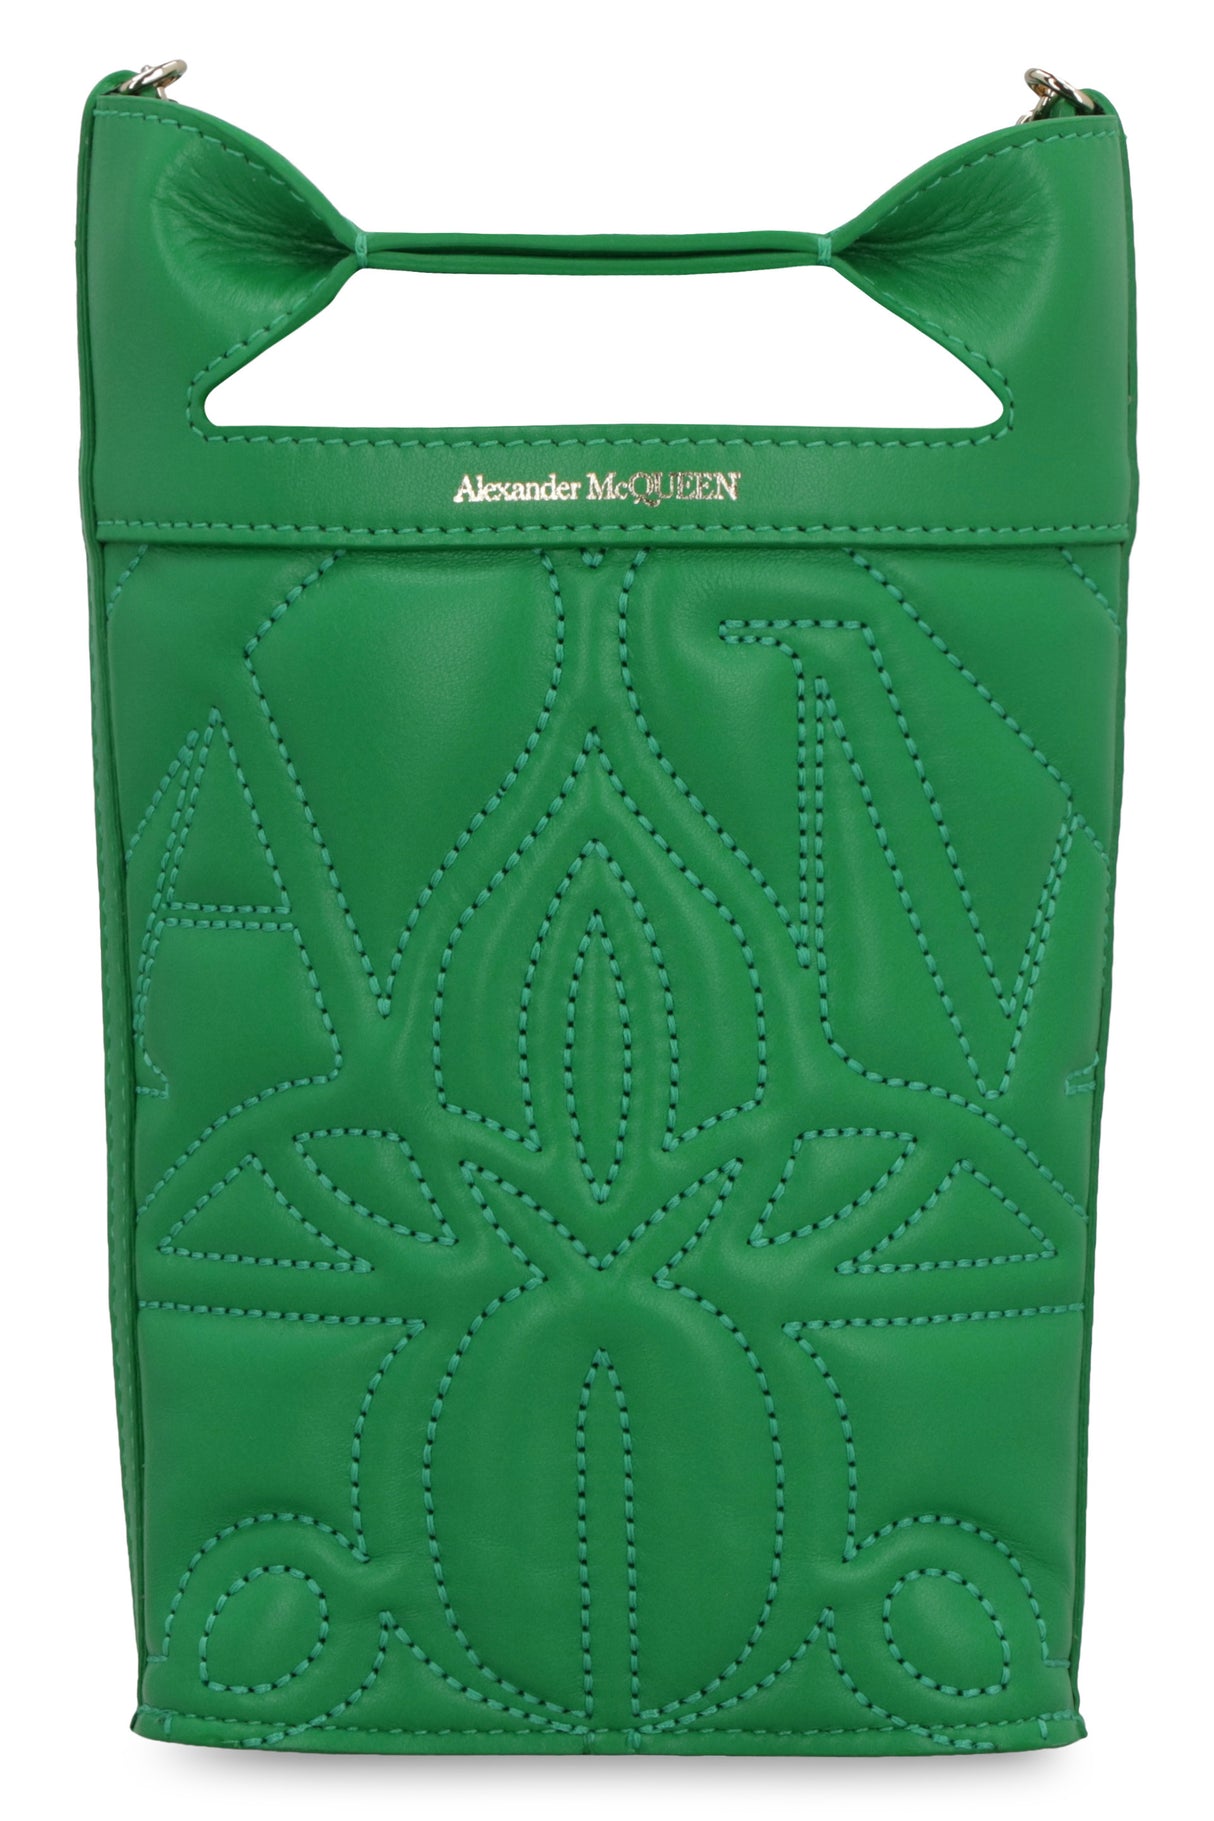 ALEXANDER MCQUEEN Quilted Mini Crossbody Handbag with Chain Strap & Gold-Tone Accents in Green - 12x17x4 cm